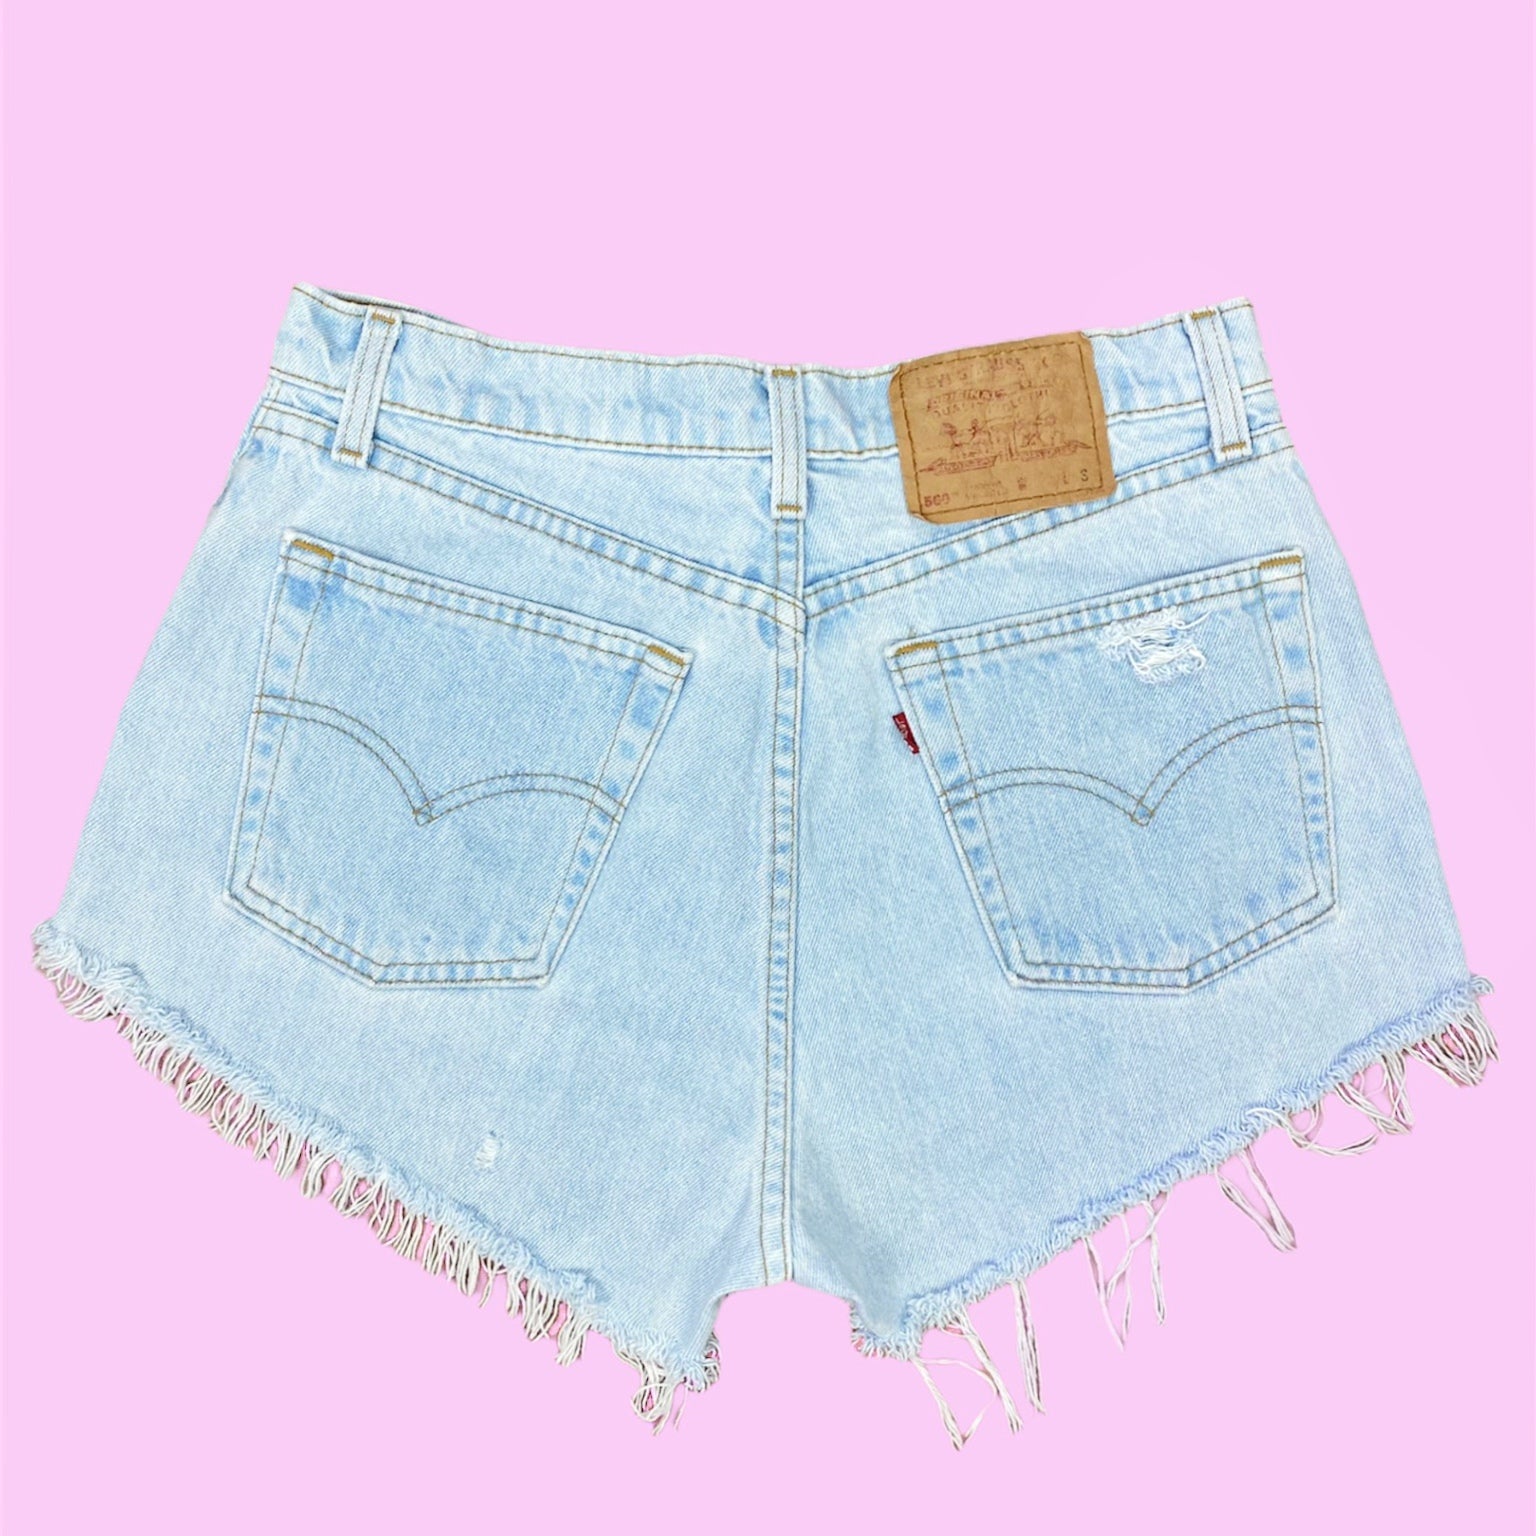 Very Light High Waisted Vintage Cut Off Distressed 560 Levis Size 11